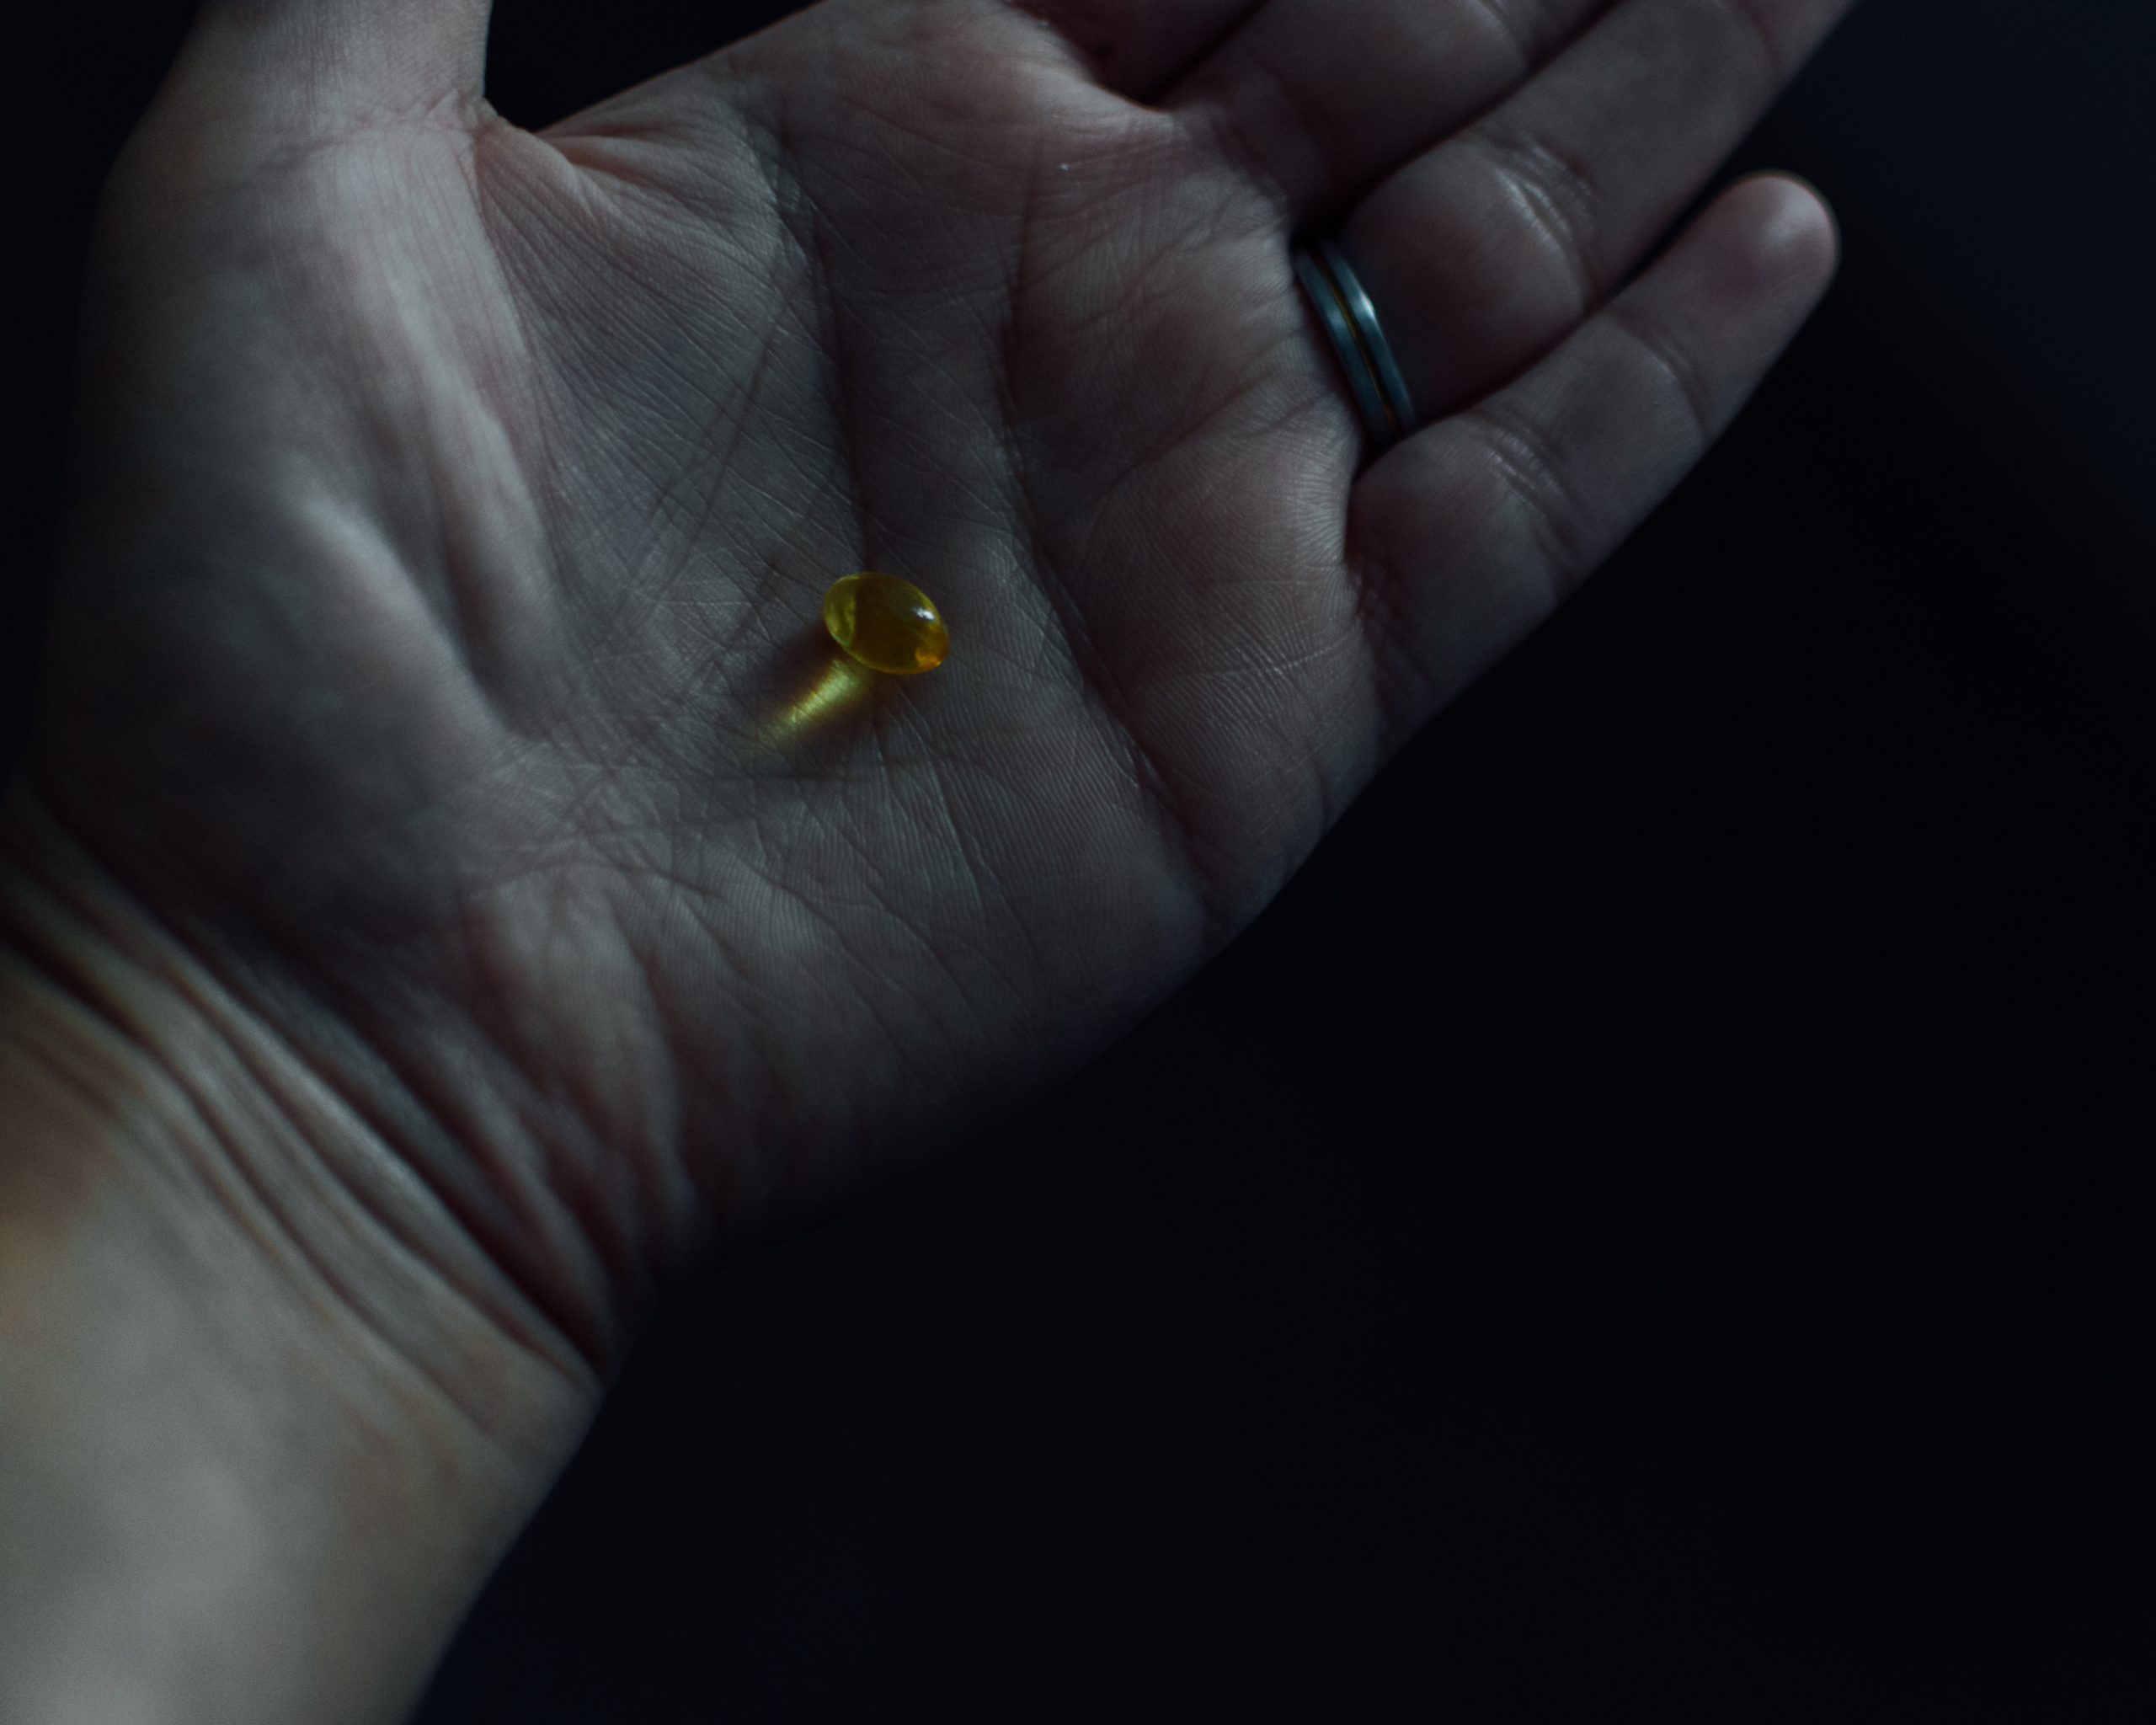 Close up image of a vitamin D capsule on a hand.